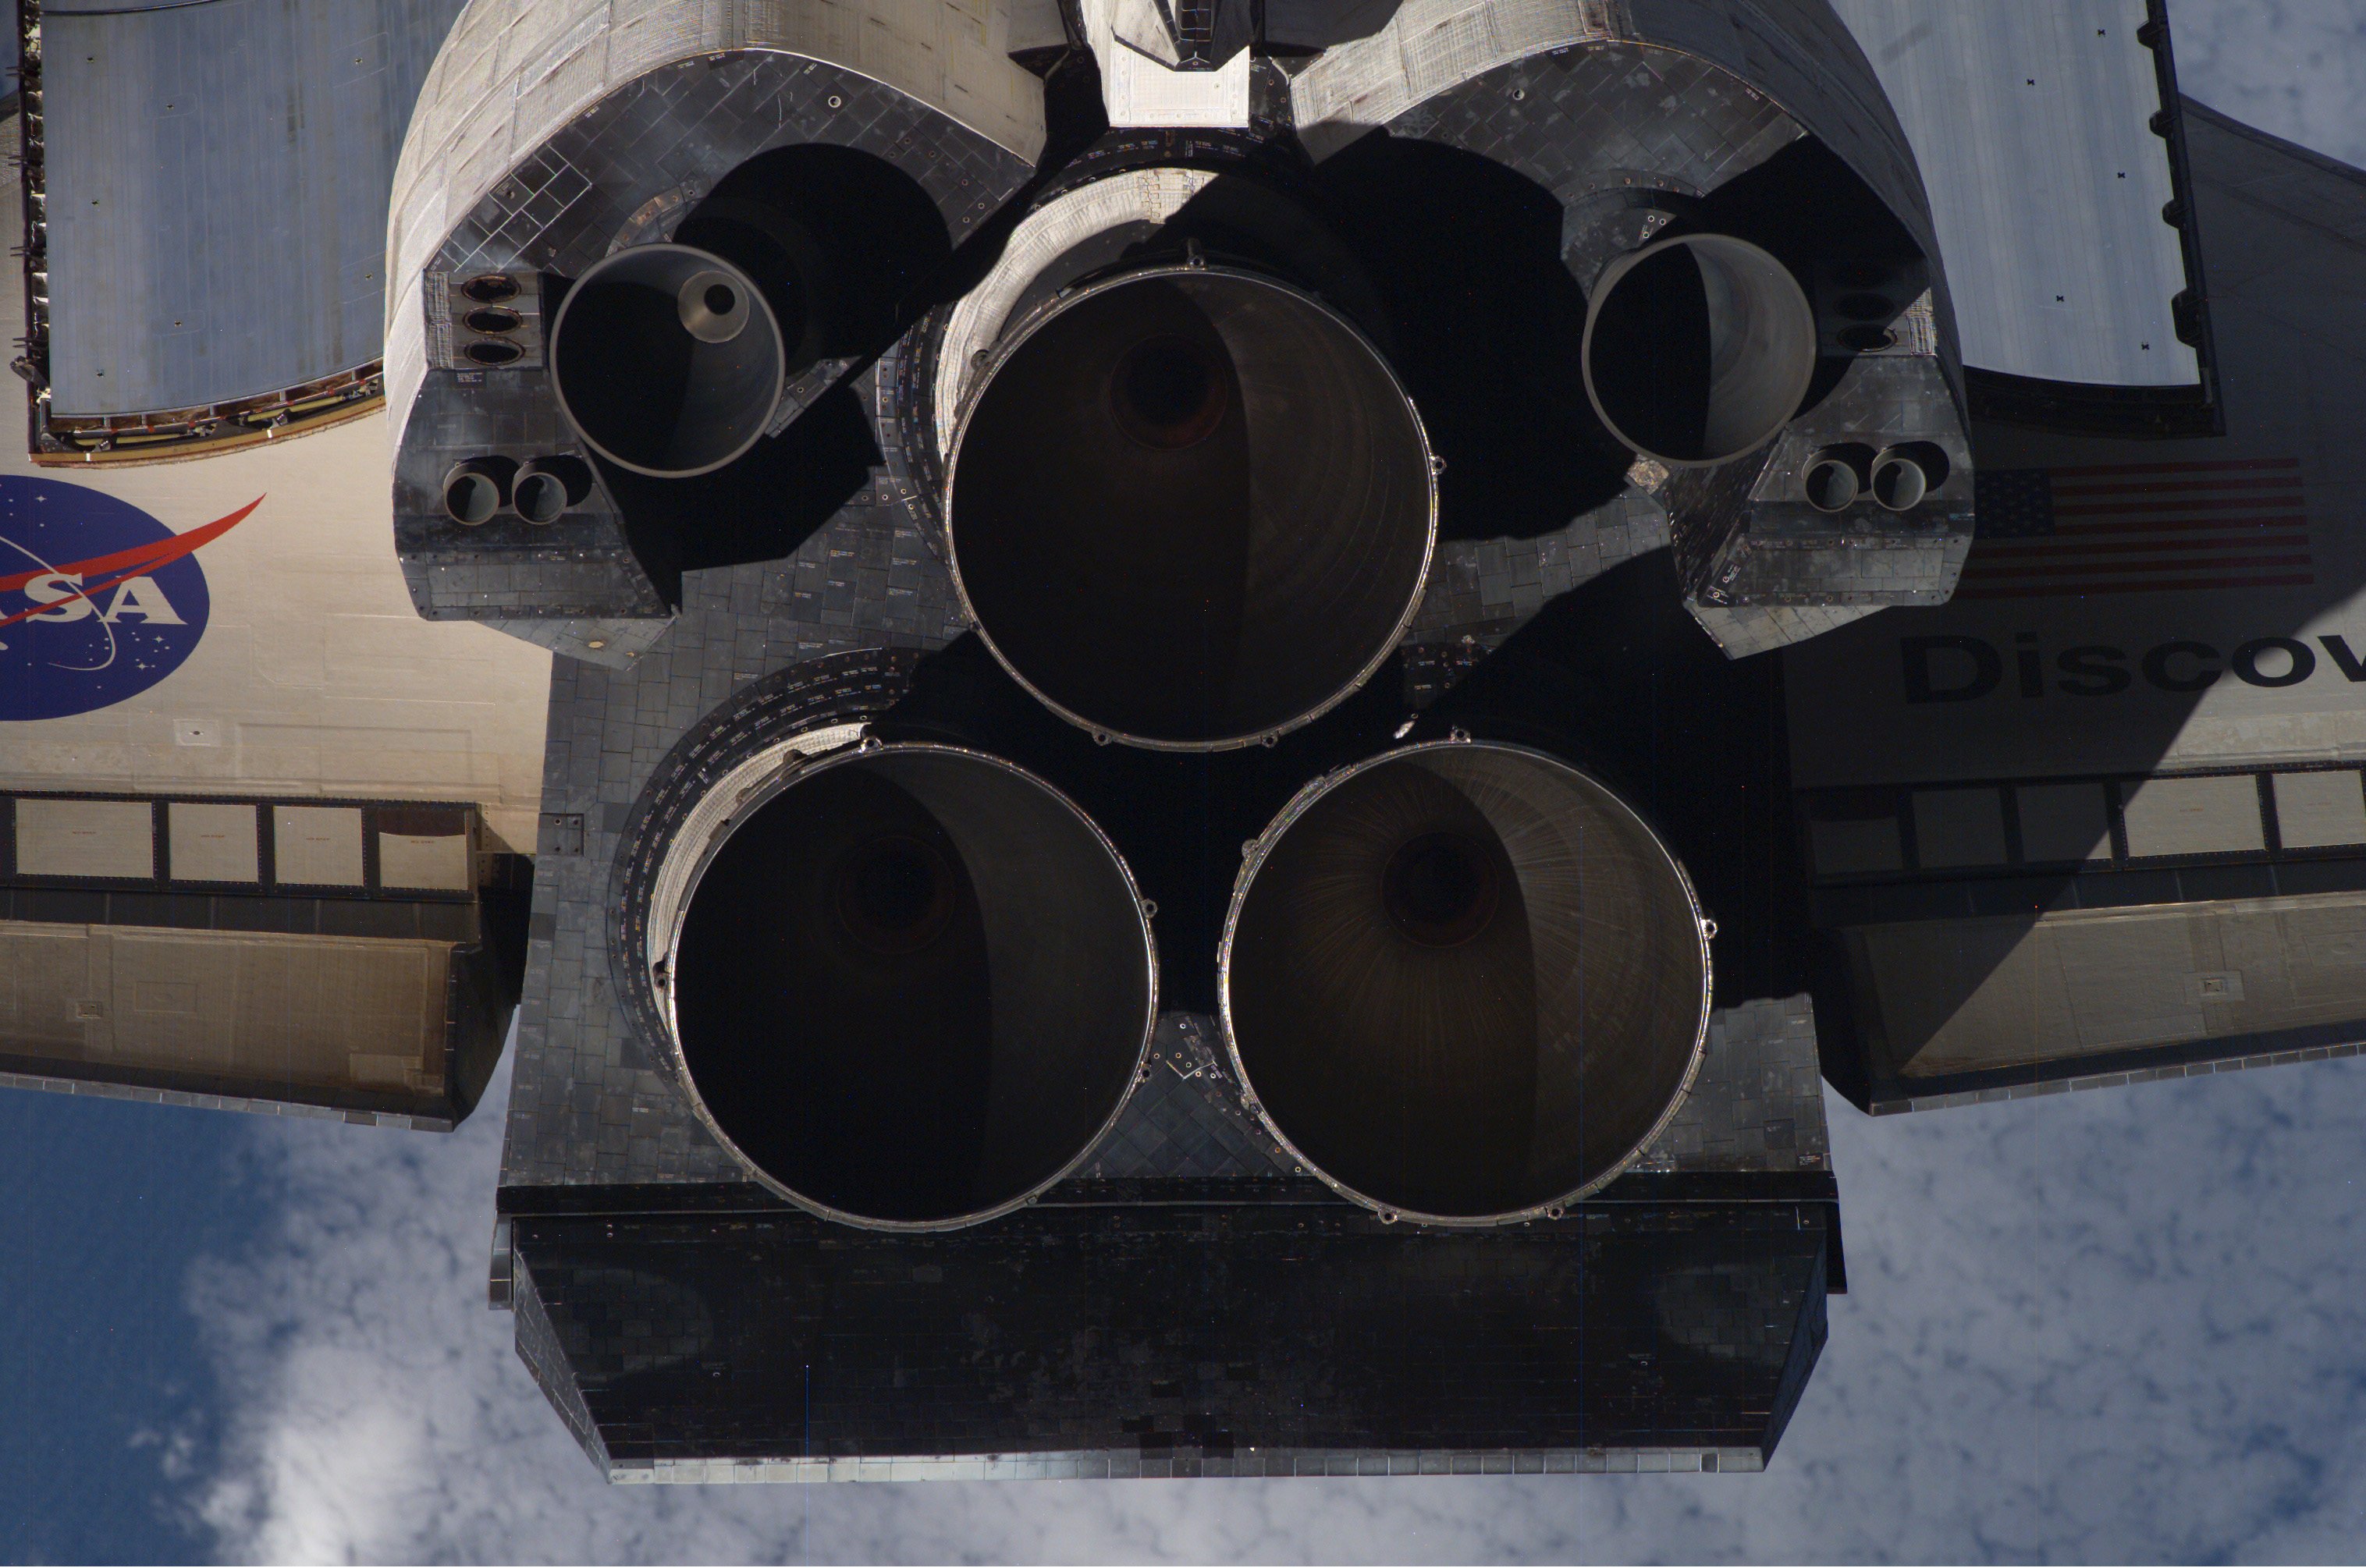 STS-116 Shuttle Engines